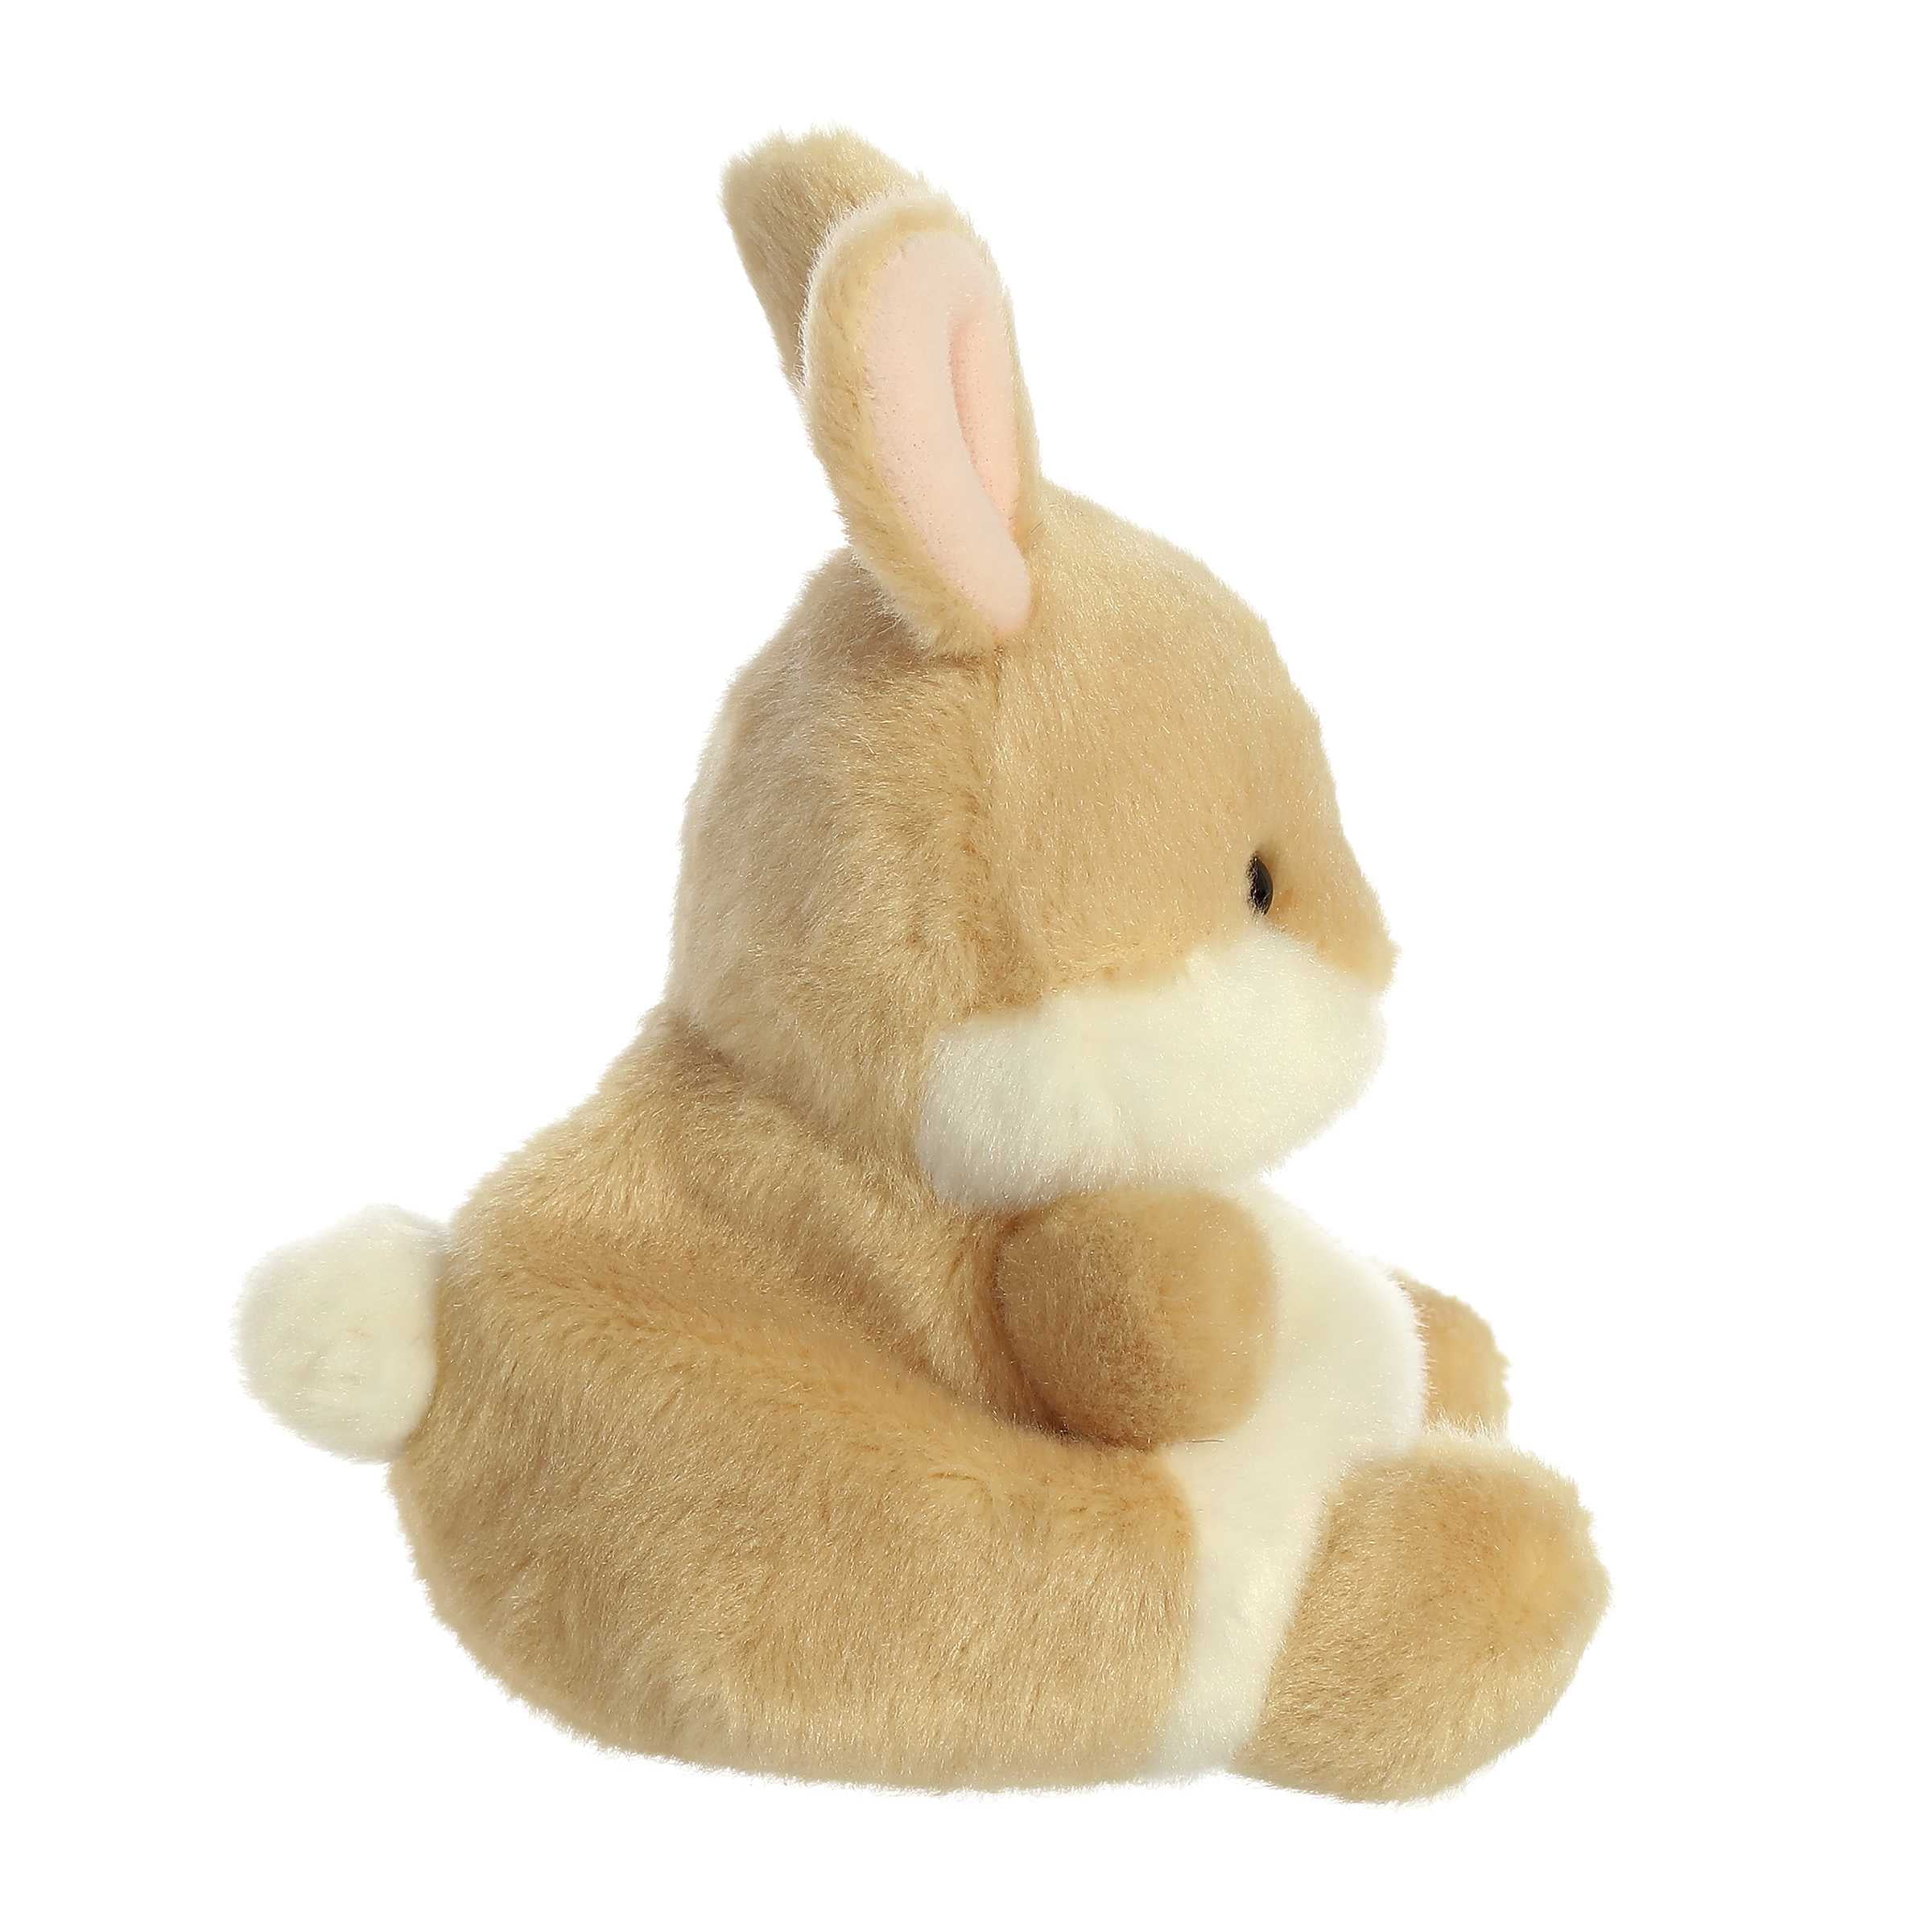  Aurora® Adorable Palm Pals™ Cottontail Bunny Stuffed Animal -  Pocket-Sized Fun - On-The-Go Play - White 5 Inches : Toys & Games